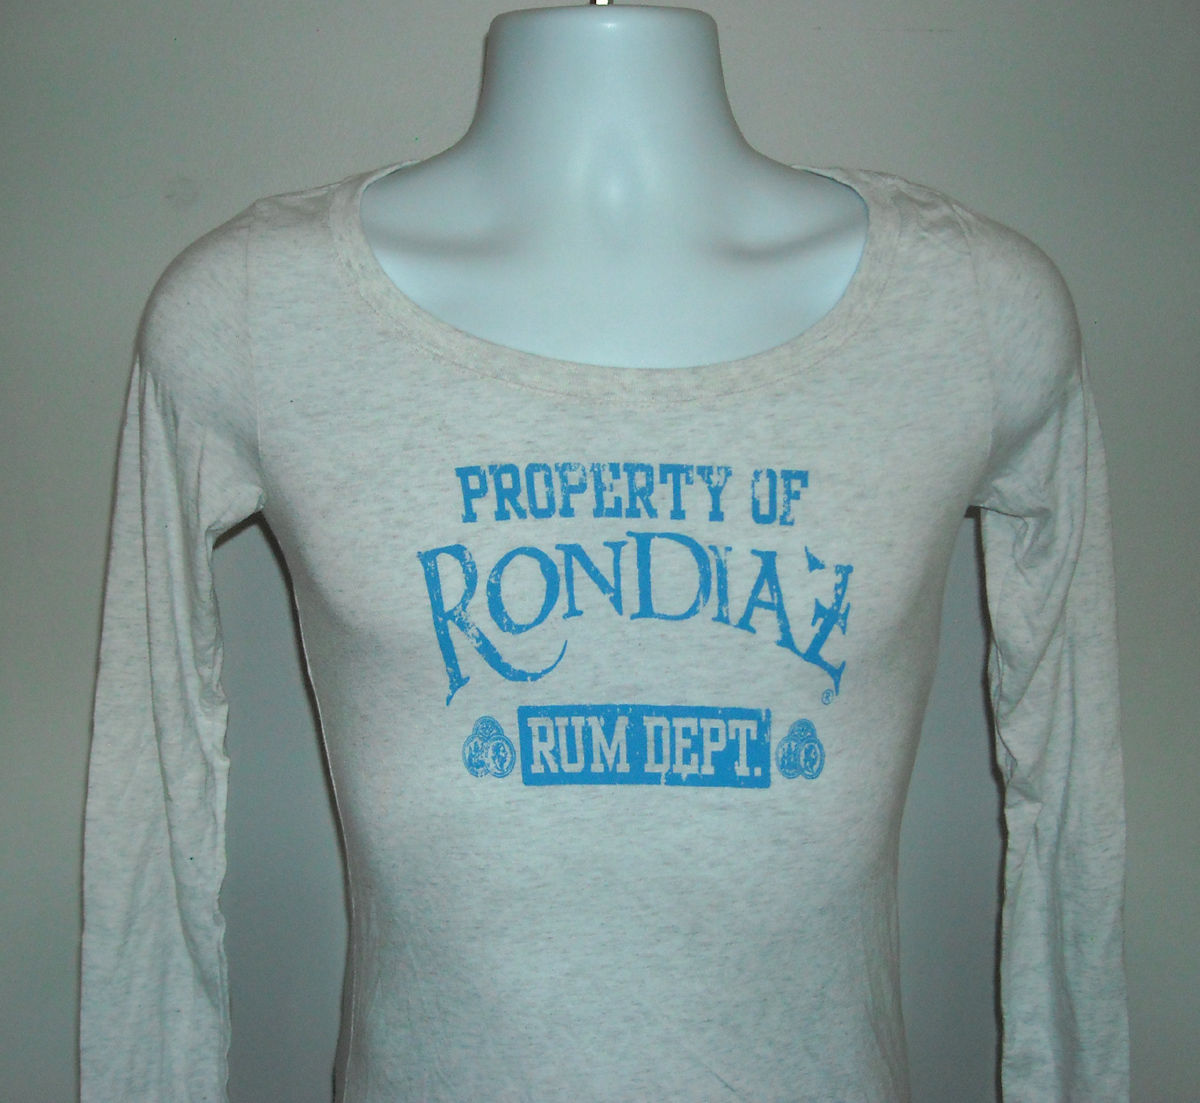 WOMENS PROPERTY OF RON DIAZ RUM  DEPT SMALL LONG SLEEVE T SHIRT - $23.71